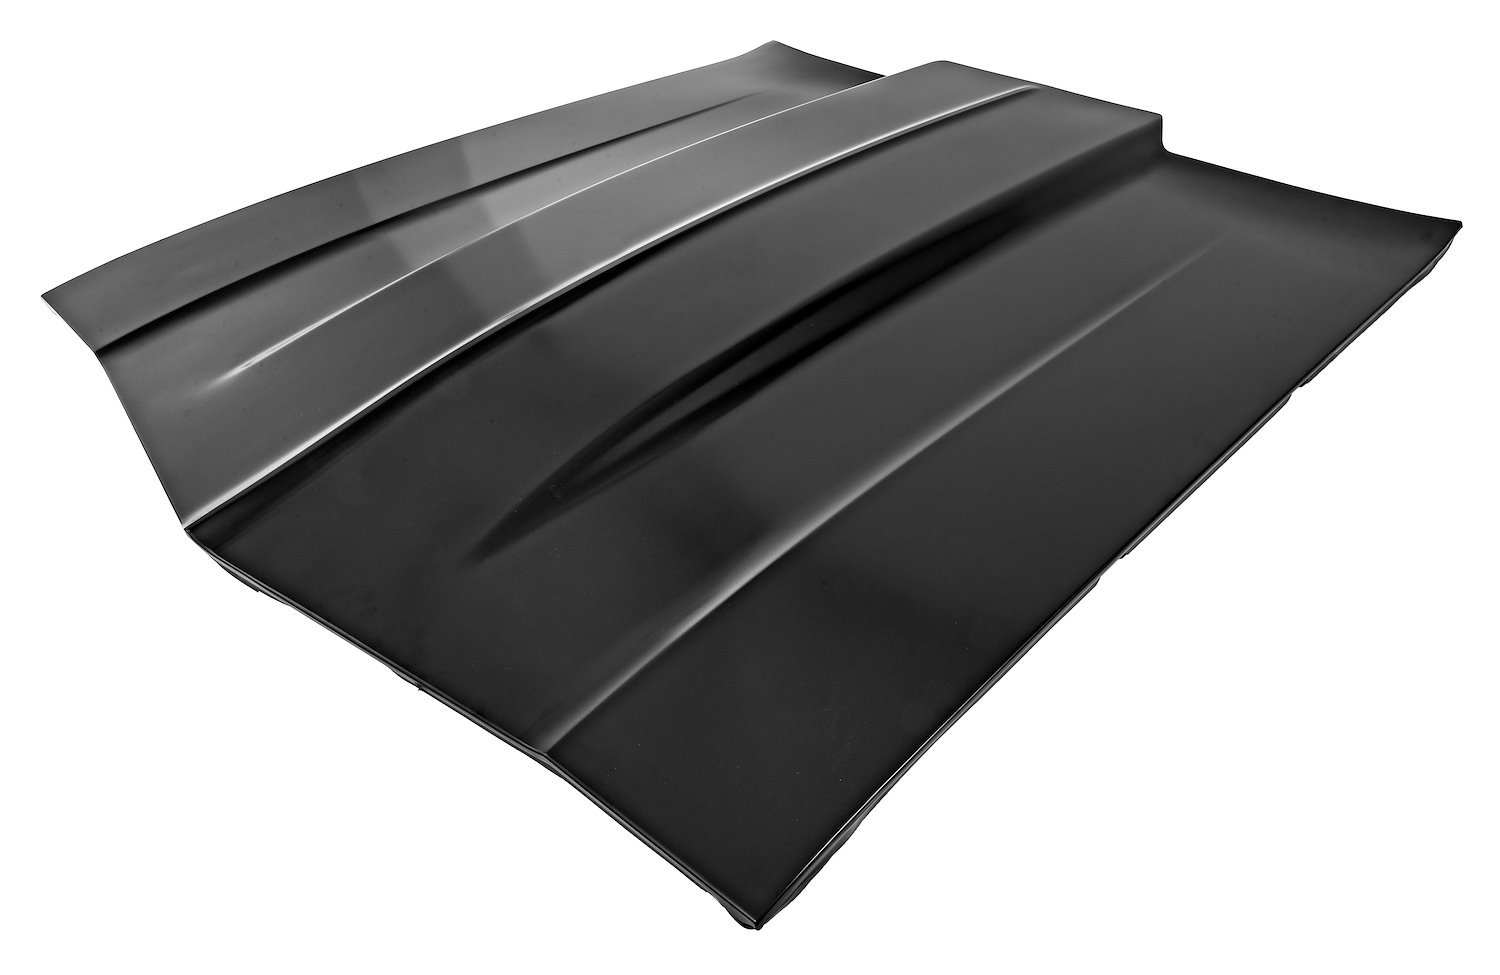 Steel Cowl Induction Hood for 1968-1969 Chevrolet Chevelle & El Camino [2 in. Cowl Induction Scoop]